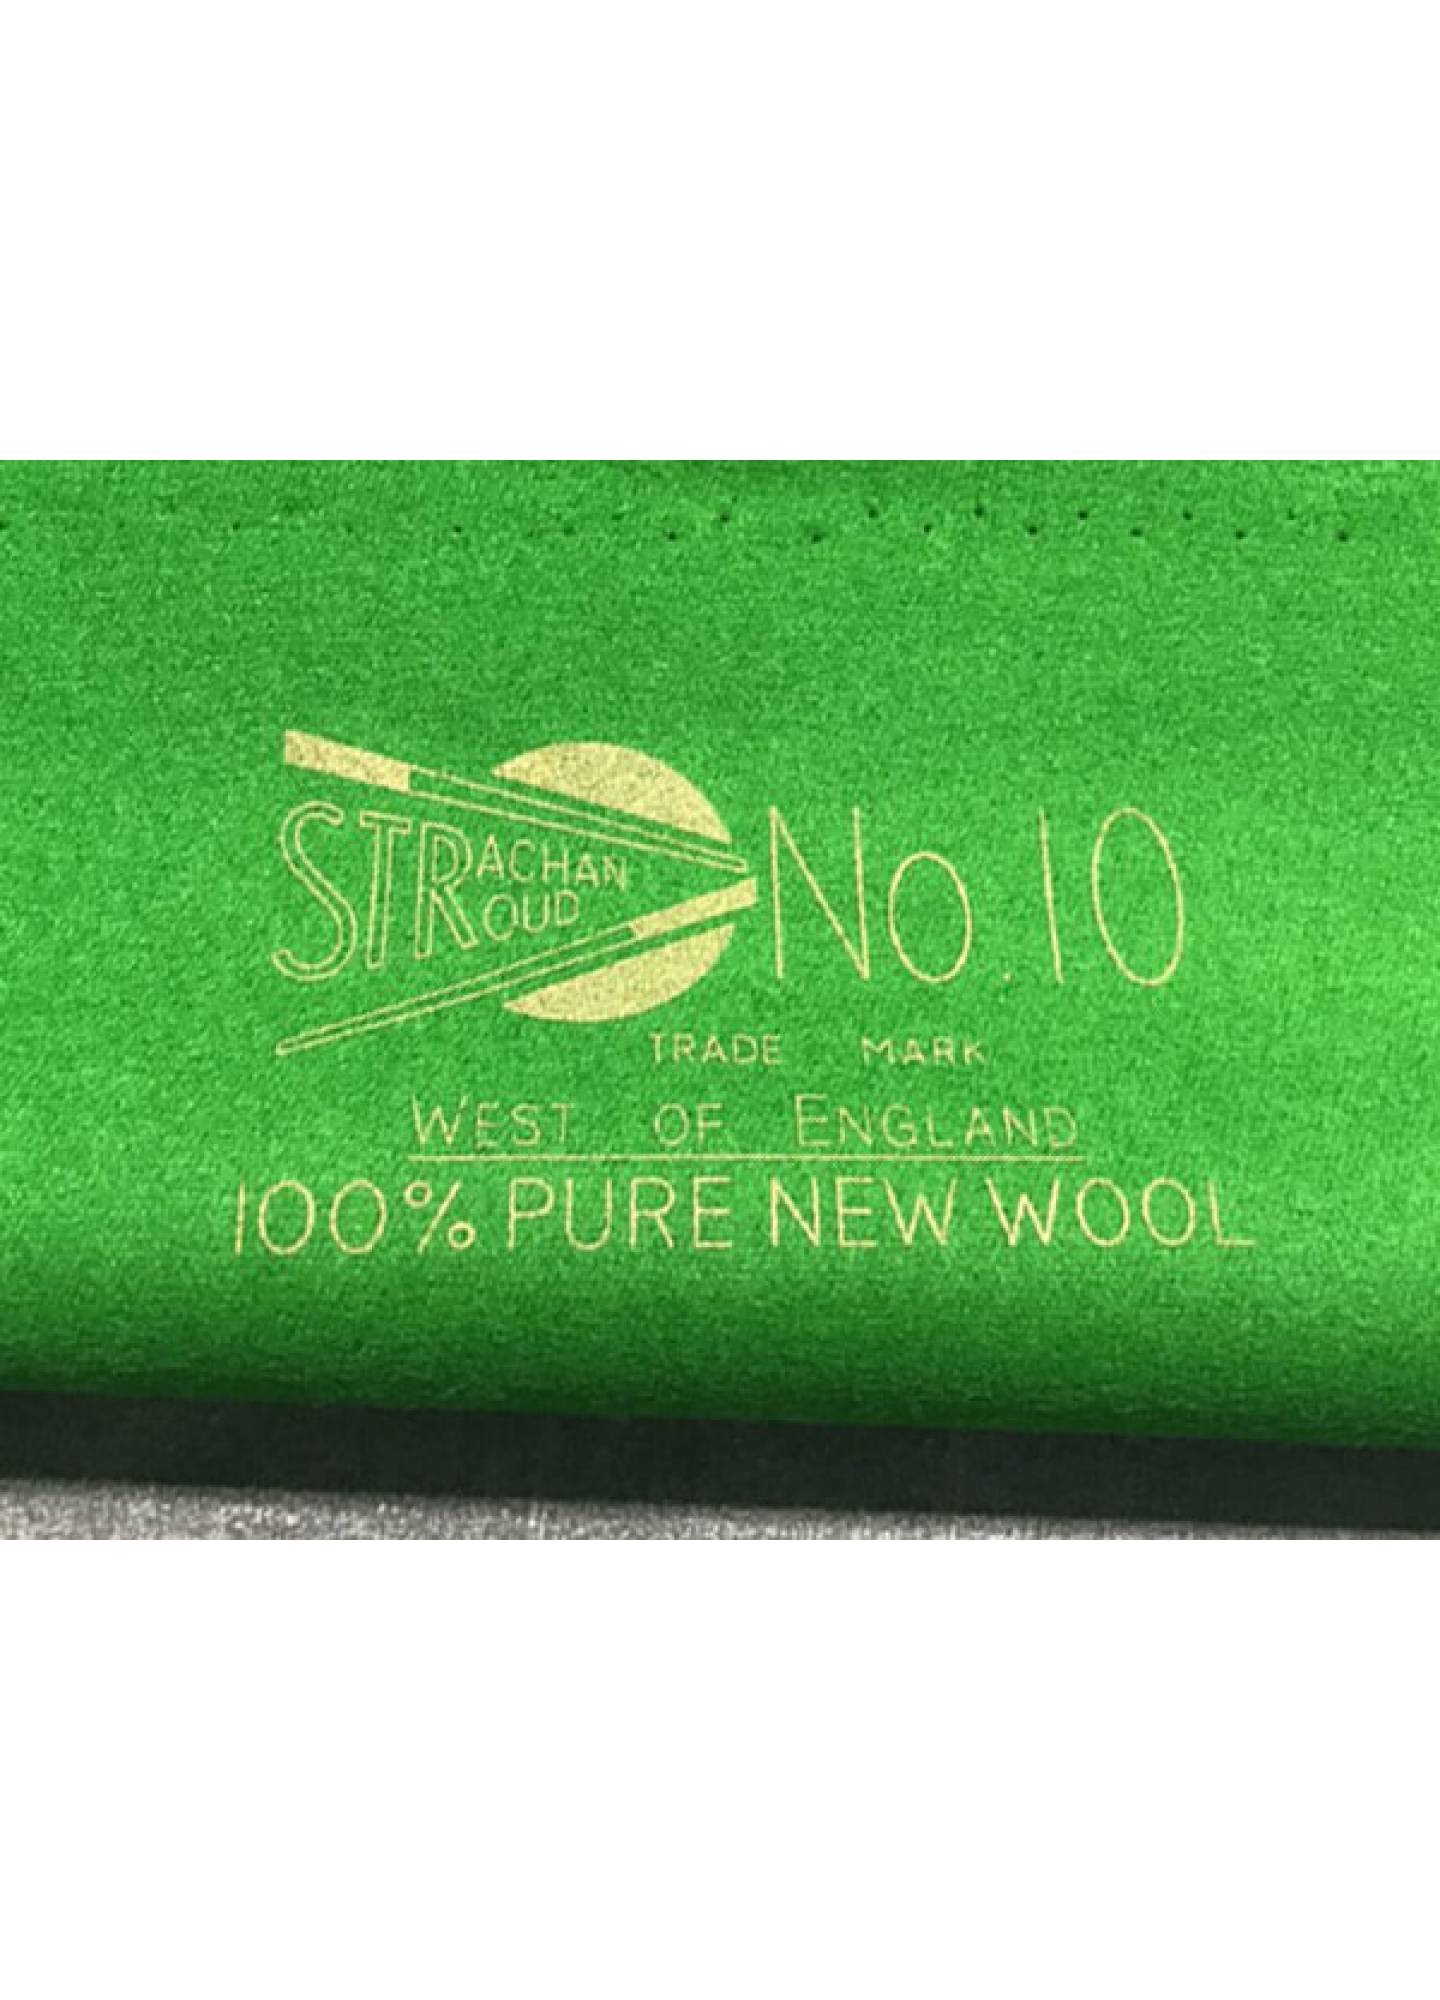 STRACHAN "NO. 10 CHAMPIONSHIP" SNOOKER CLOTH (12FT X 6FT)